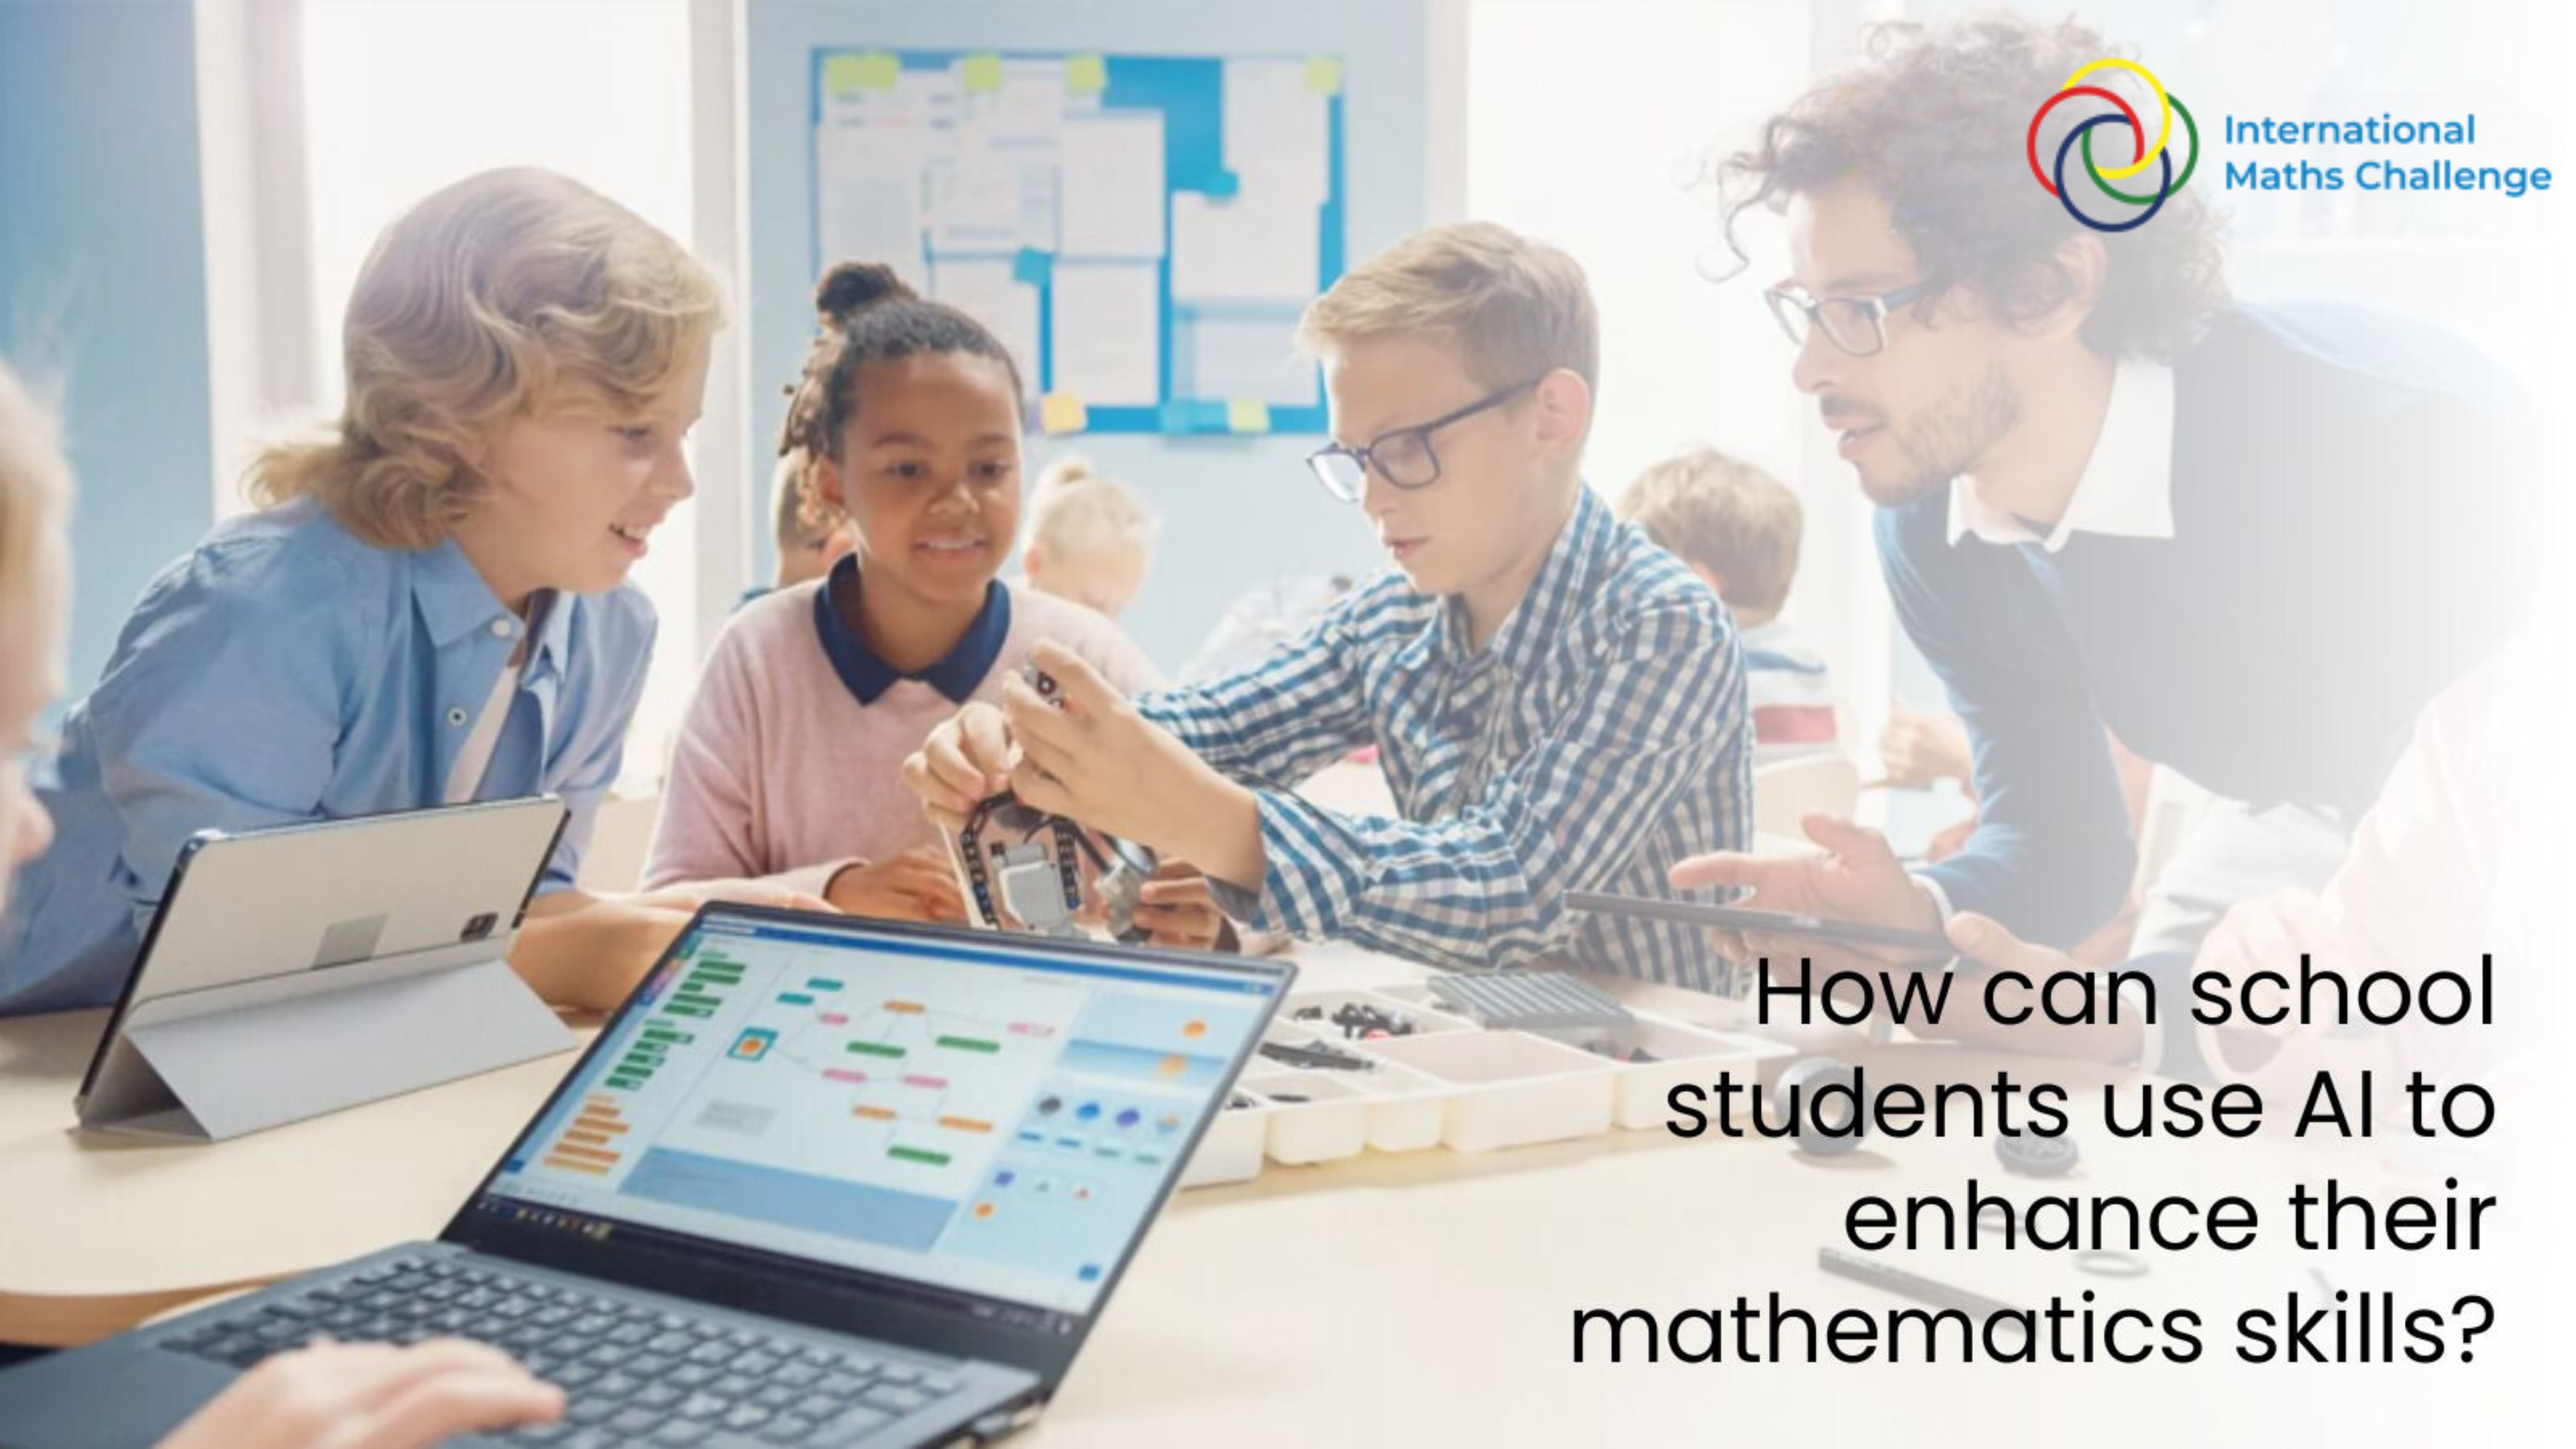 How can school students use AI to enhance their mathematics skills?